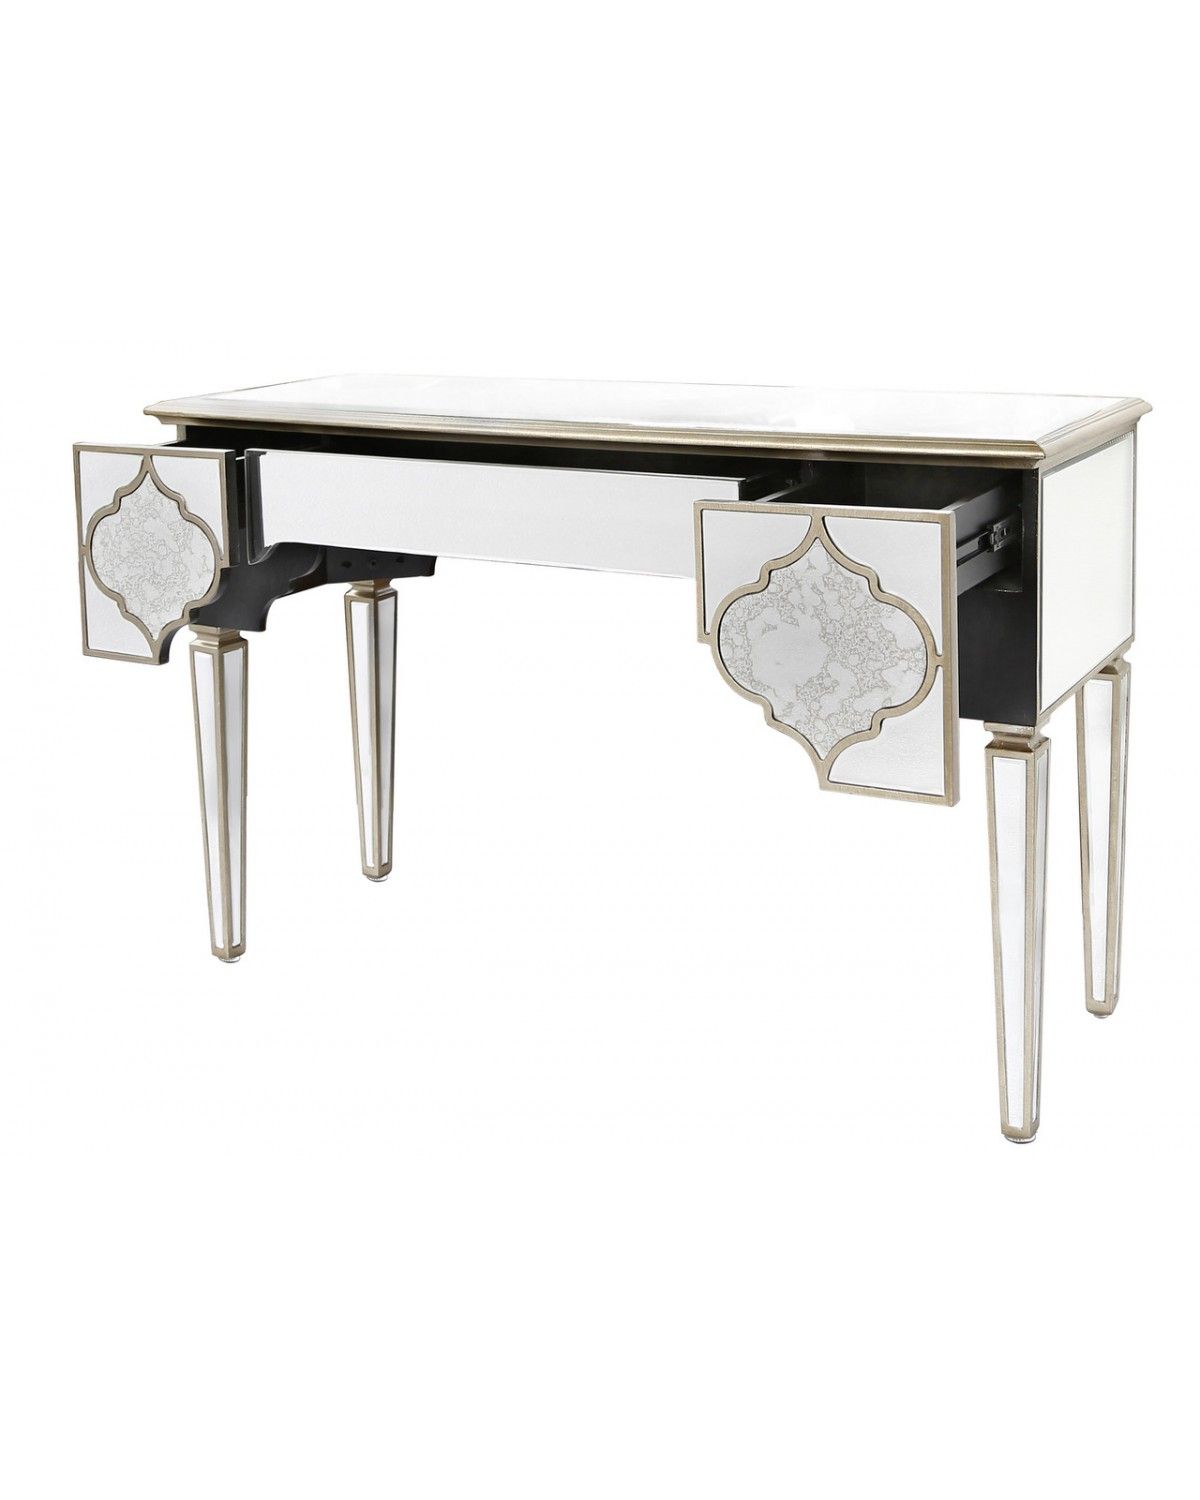 Morocco 1 Drawer Mirror Console Table | George Street Throughout Silver Mirror And Chrome Console Tables (View 18 of 20)